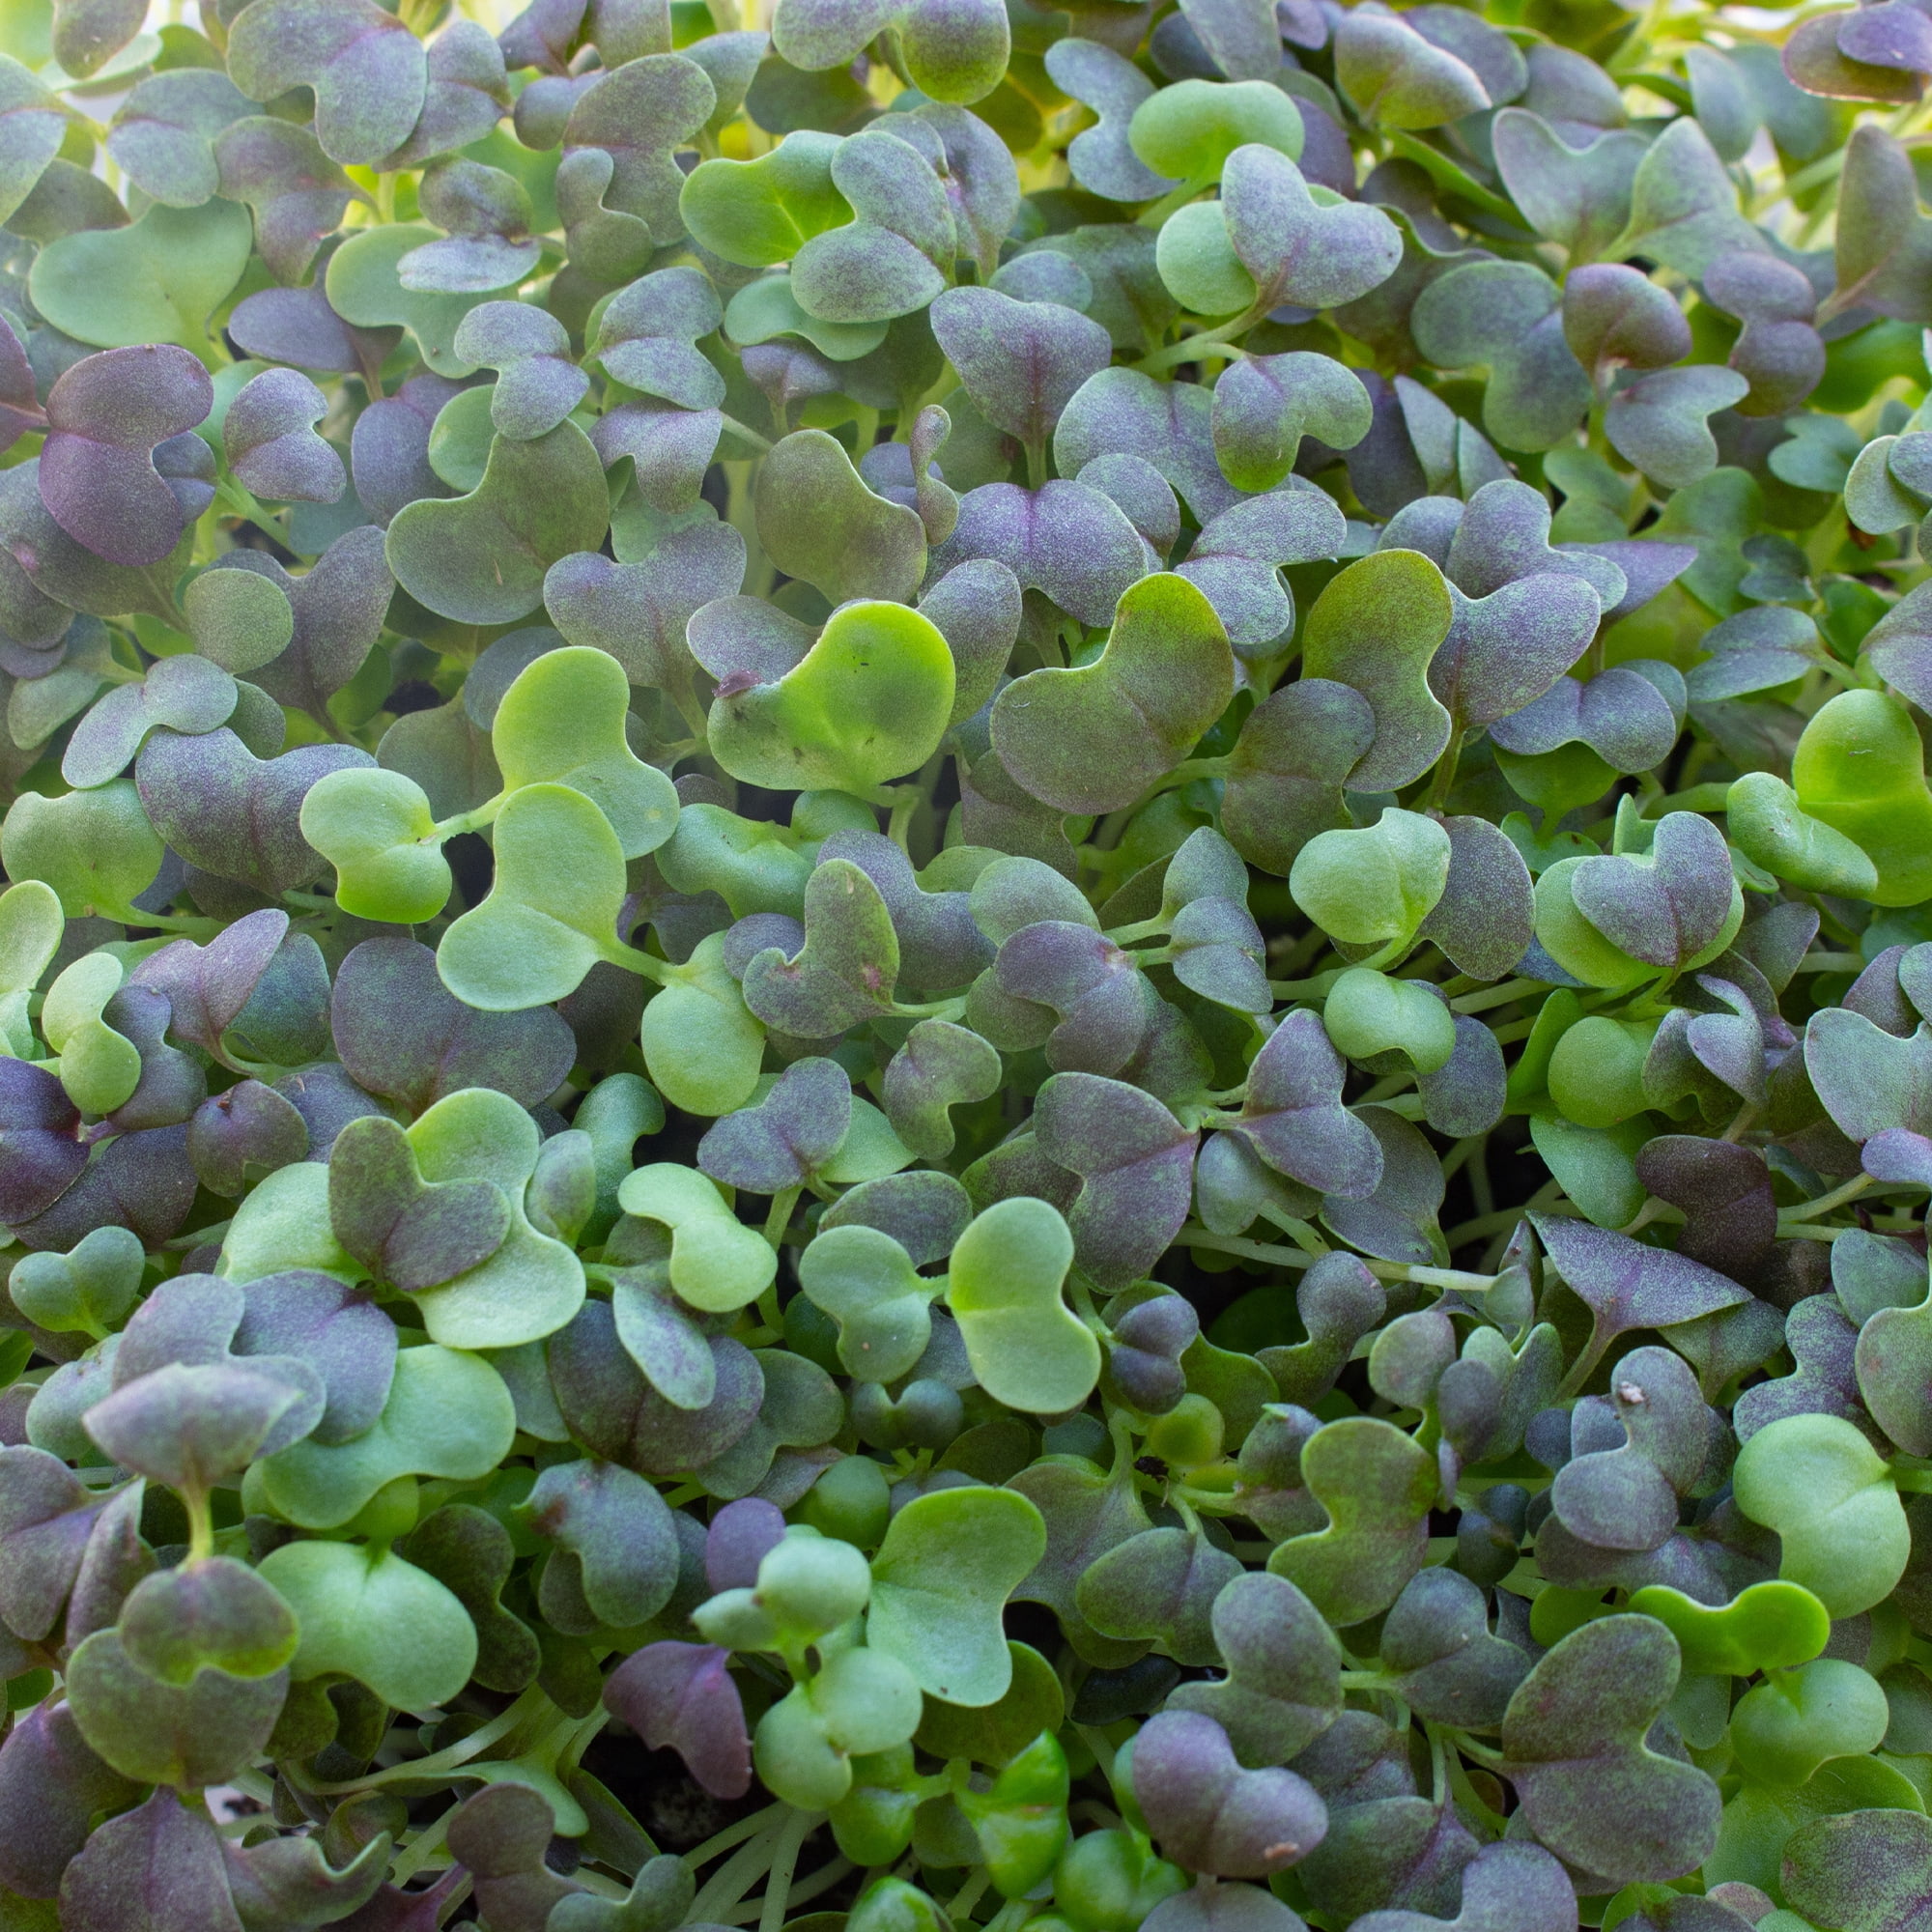 Colorful Mustard Microgreens Seed Mix - 1 Oz ~15,000 Seeds- Colorful Blend of Mustard Micro Greens Seeds Including Green, Purple, and Red Mustard Seeds